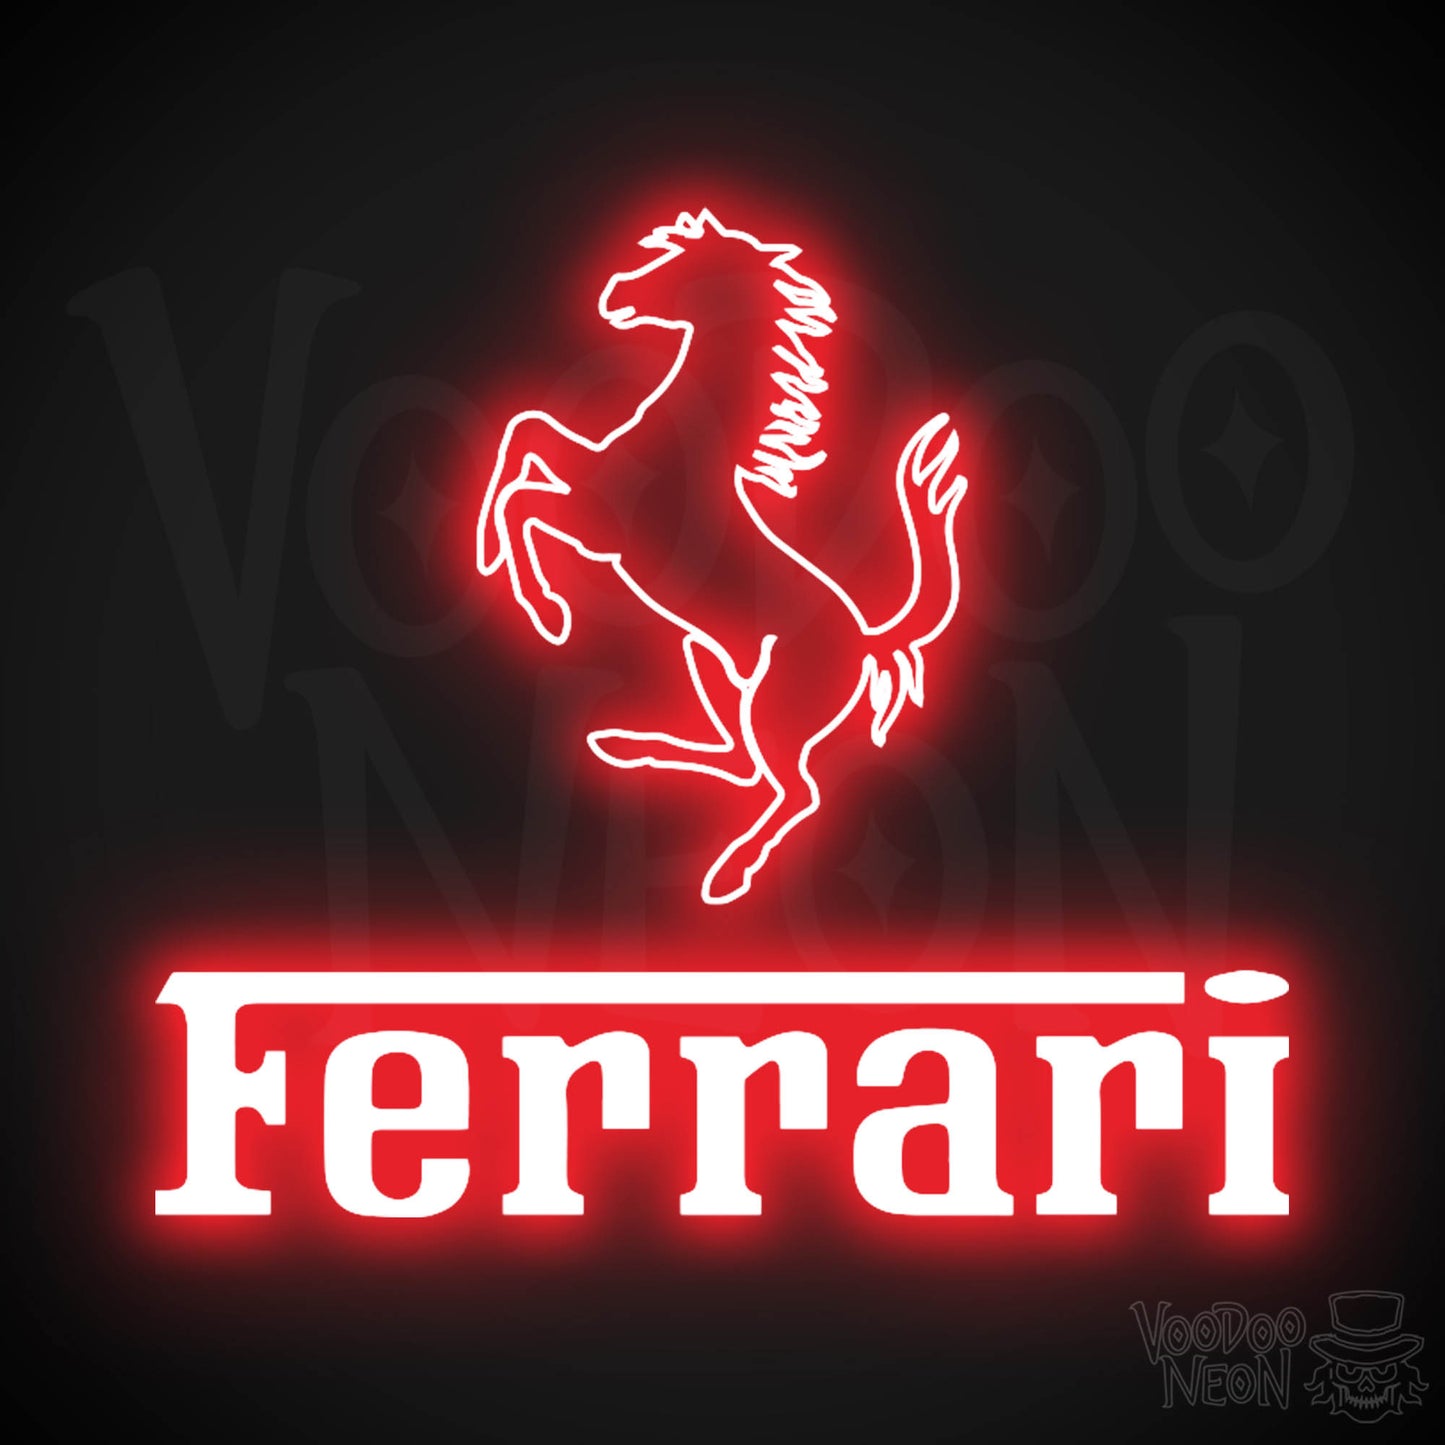 Ferrari Neon Sign - Neon Ferrari Sign - Ferrari Logo Wall Art - Color Red